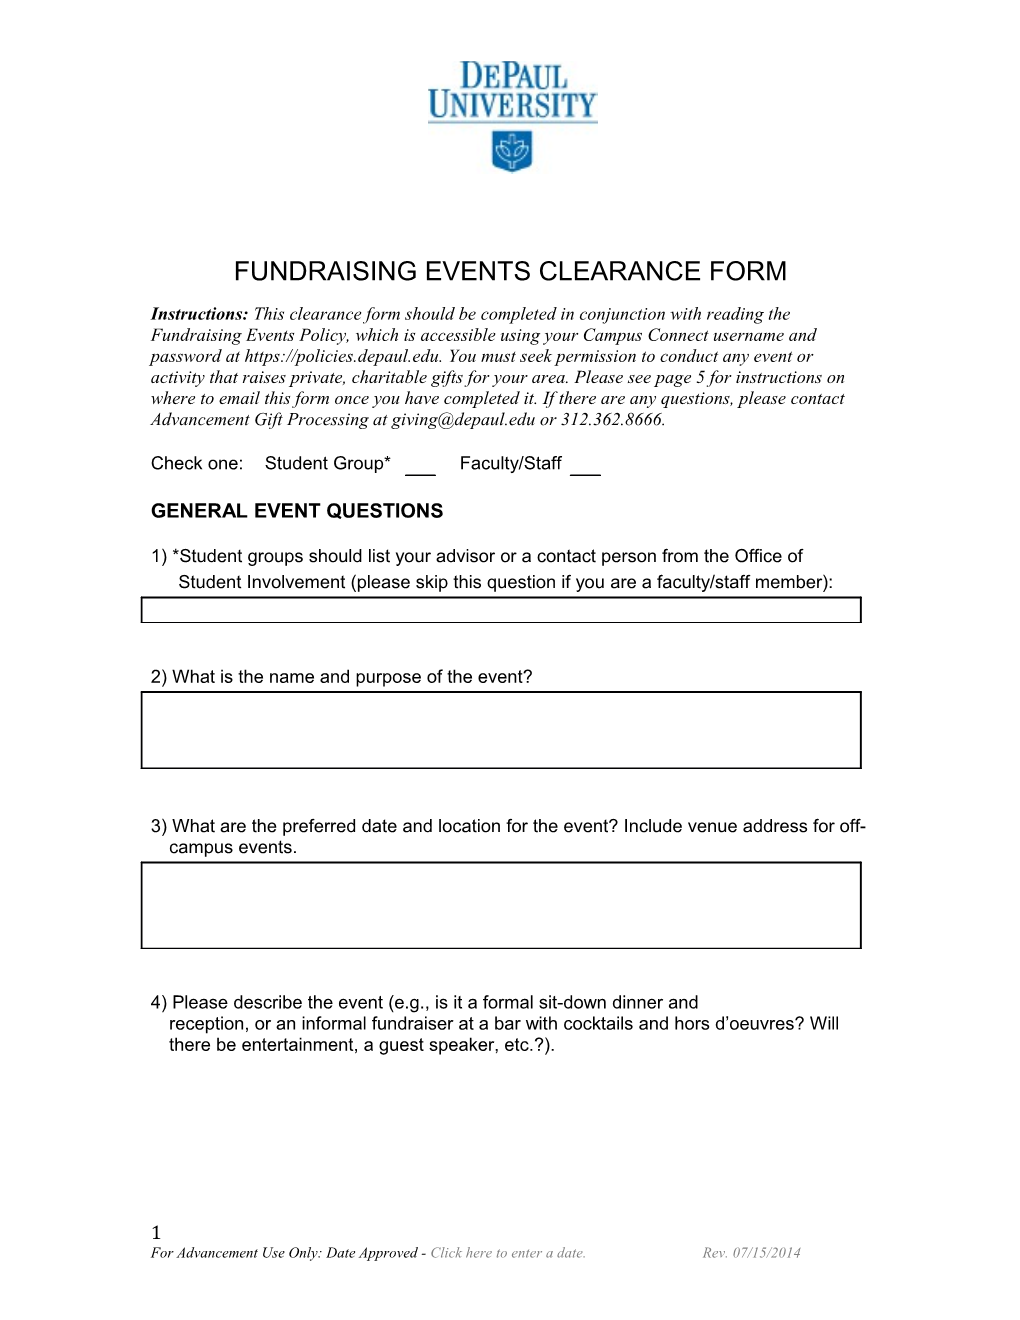 Fundraising Events Clearance Form